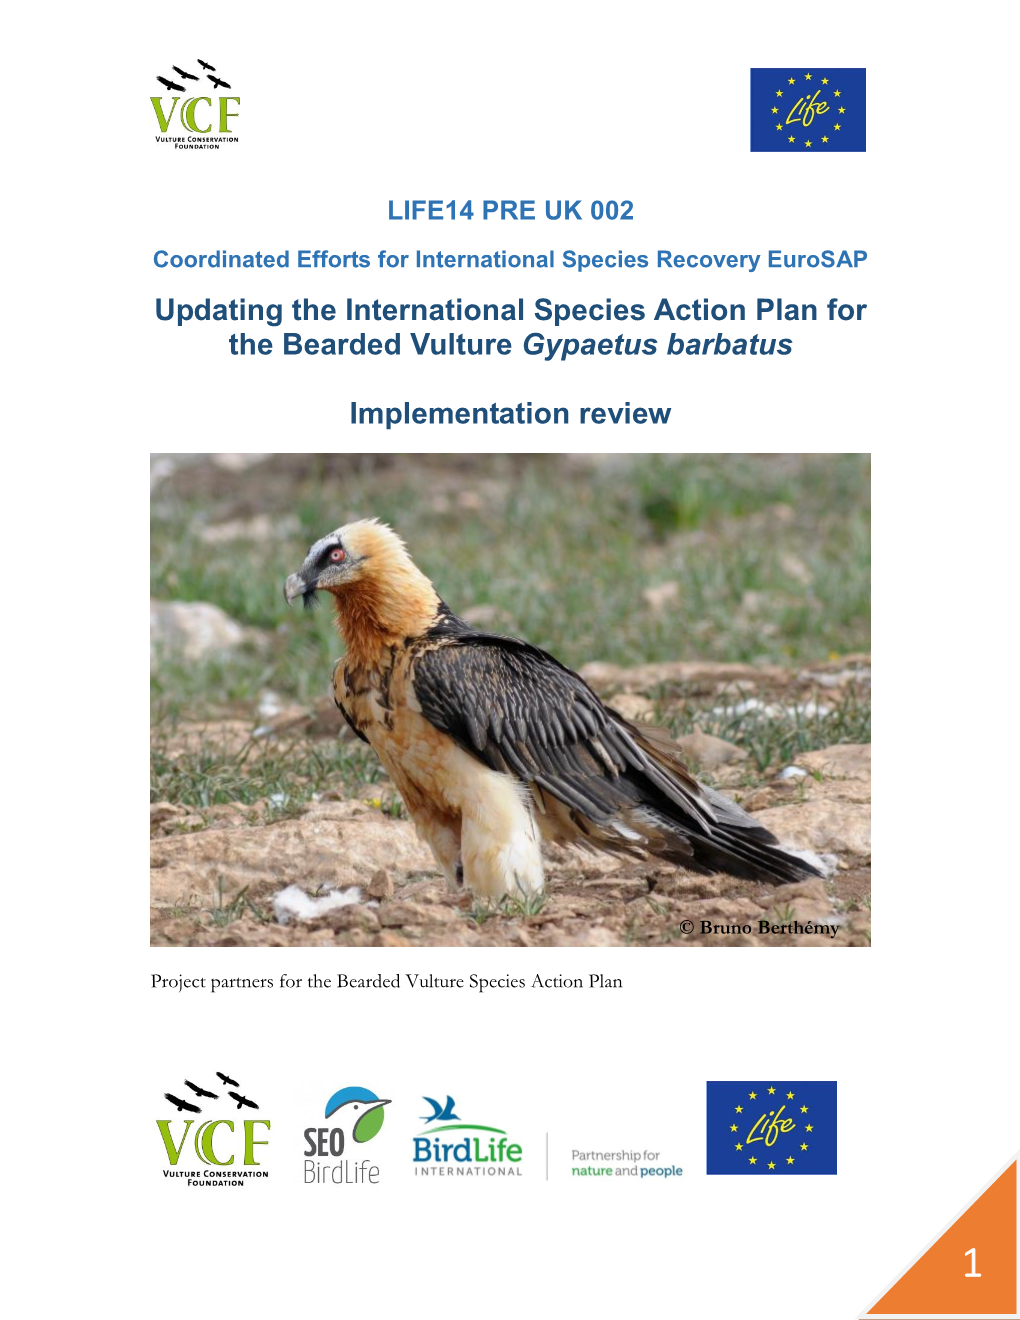 Updating the International Species Action Plan for the Bearded Vulture Gypaetus Barbatus